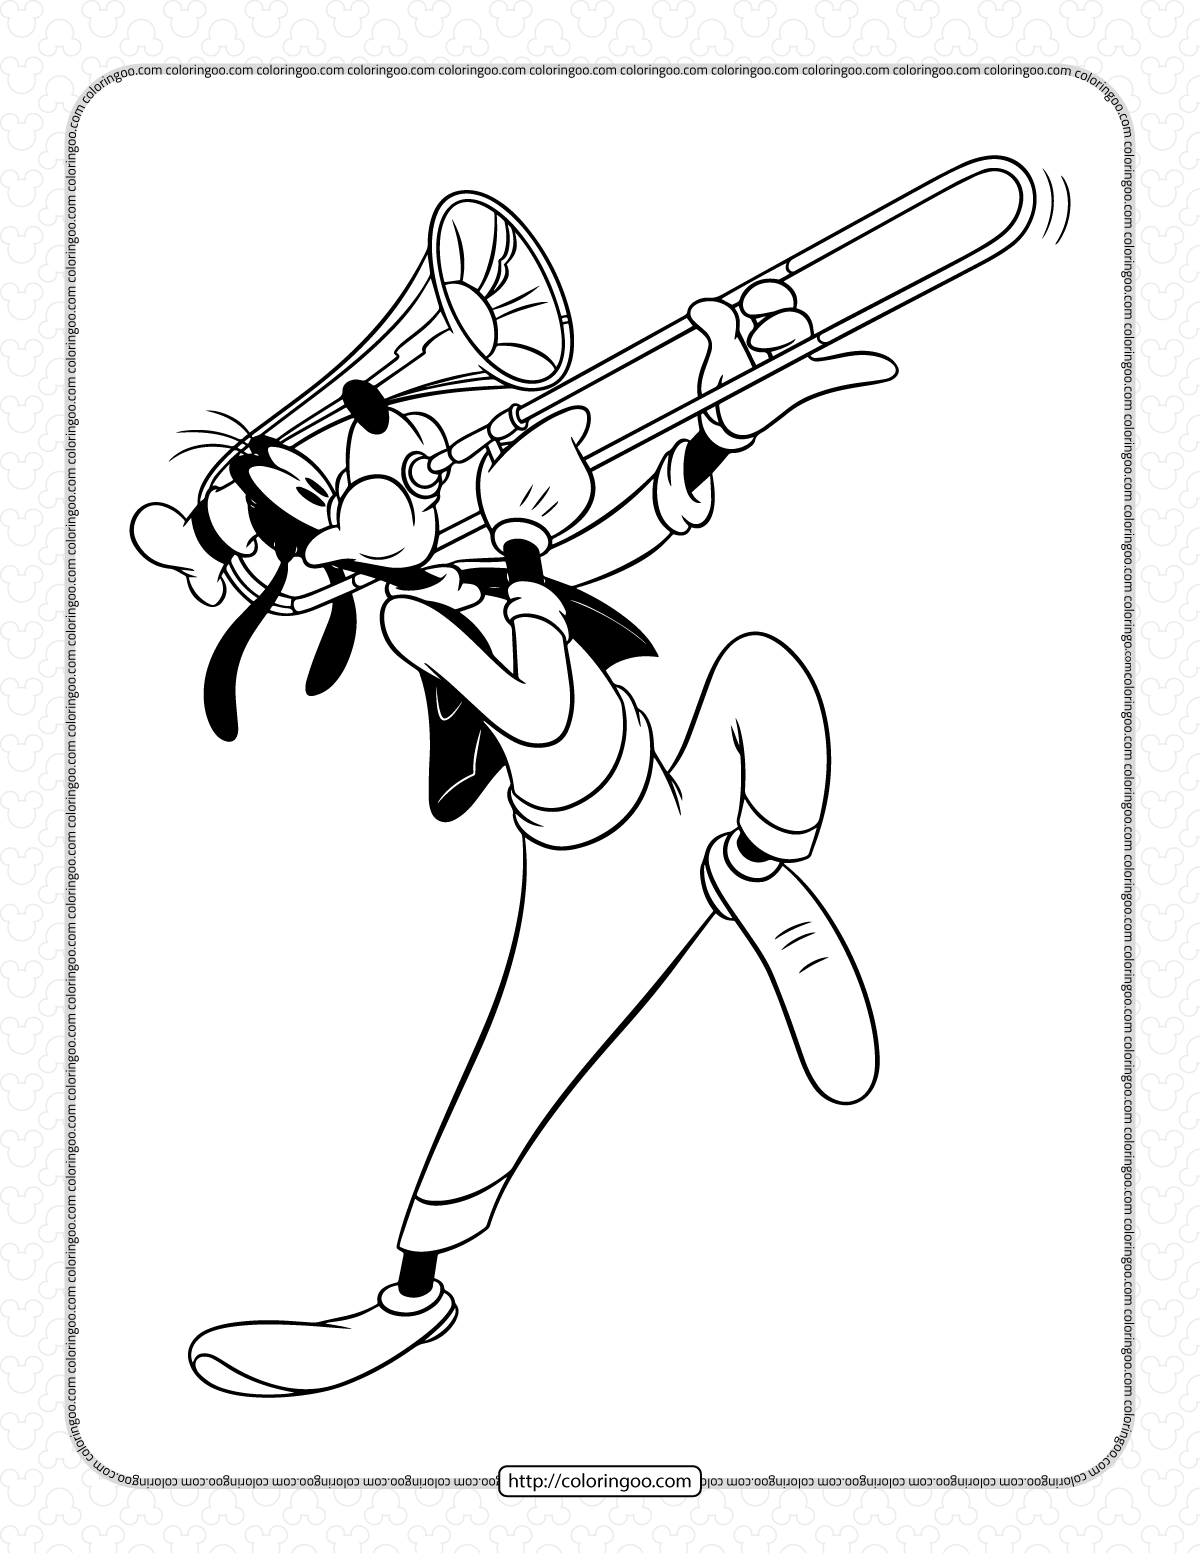 goofy plays the trombone coloring page